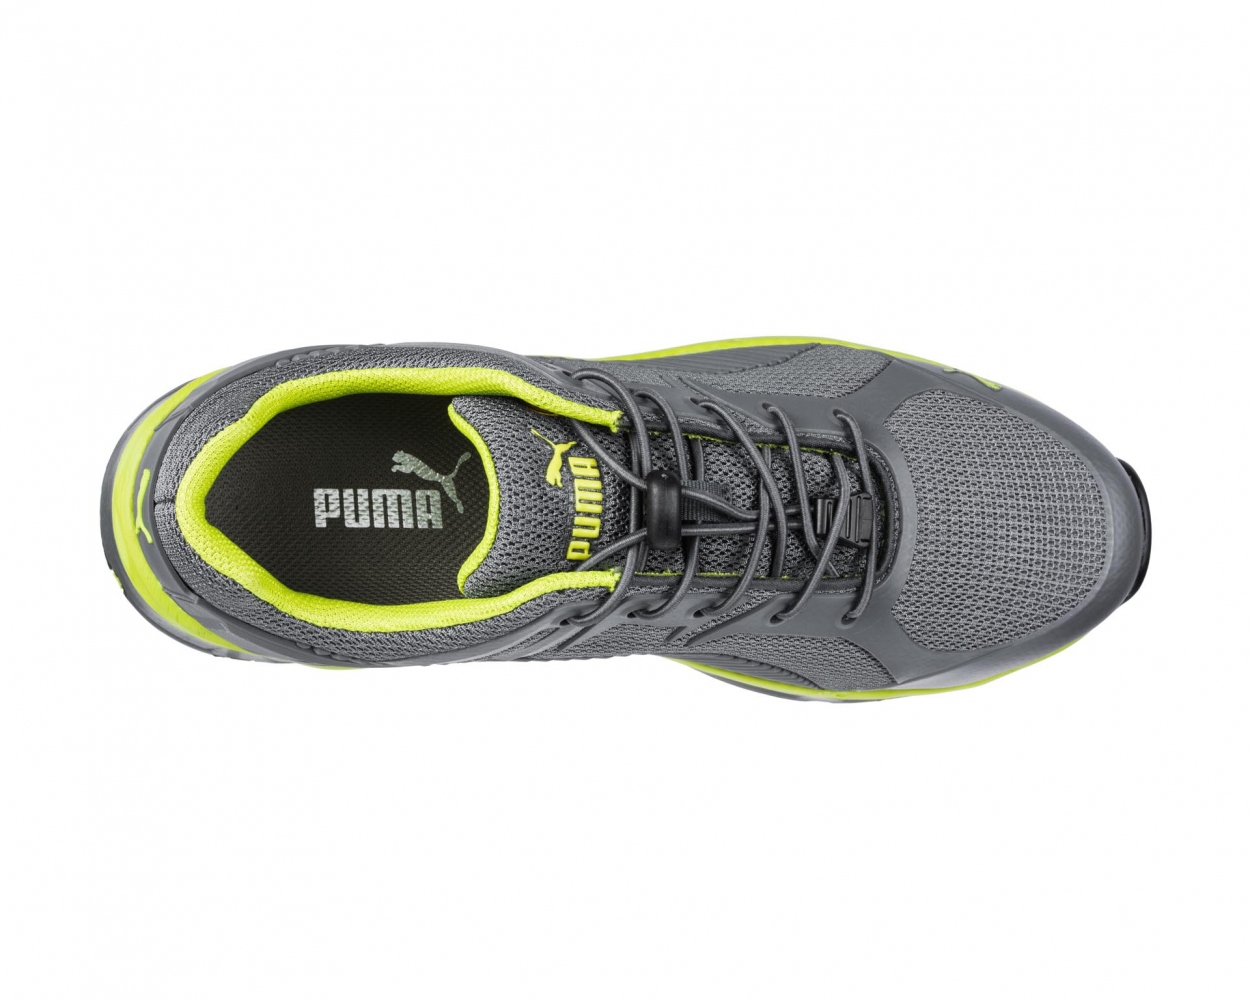 pics/Albatros/Safety Shoes/643880/puma-643880-fuse-motion-2-green-low-809-top.jpg